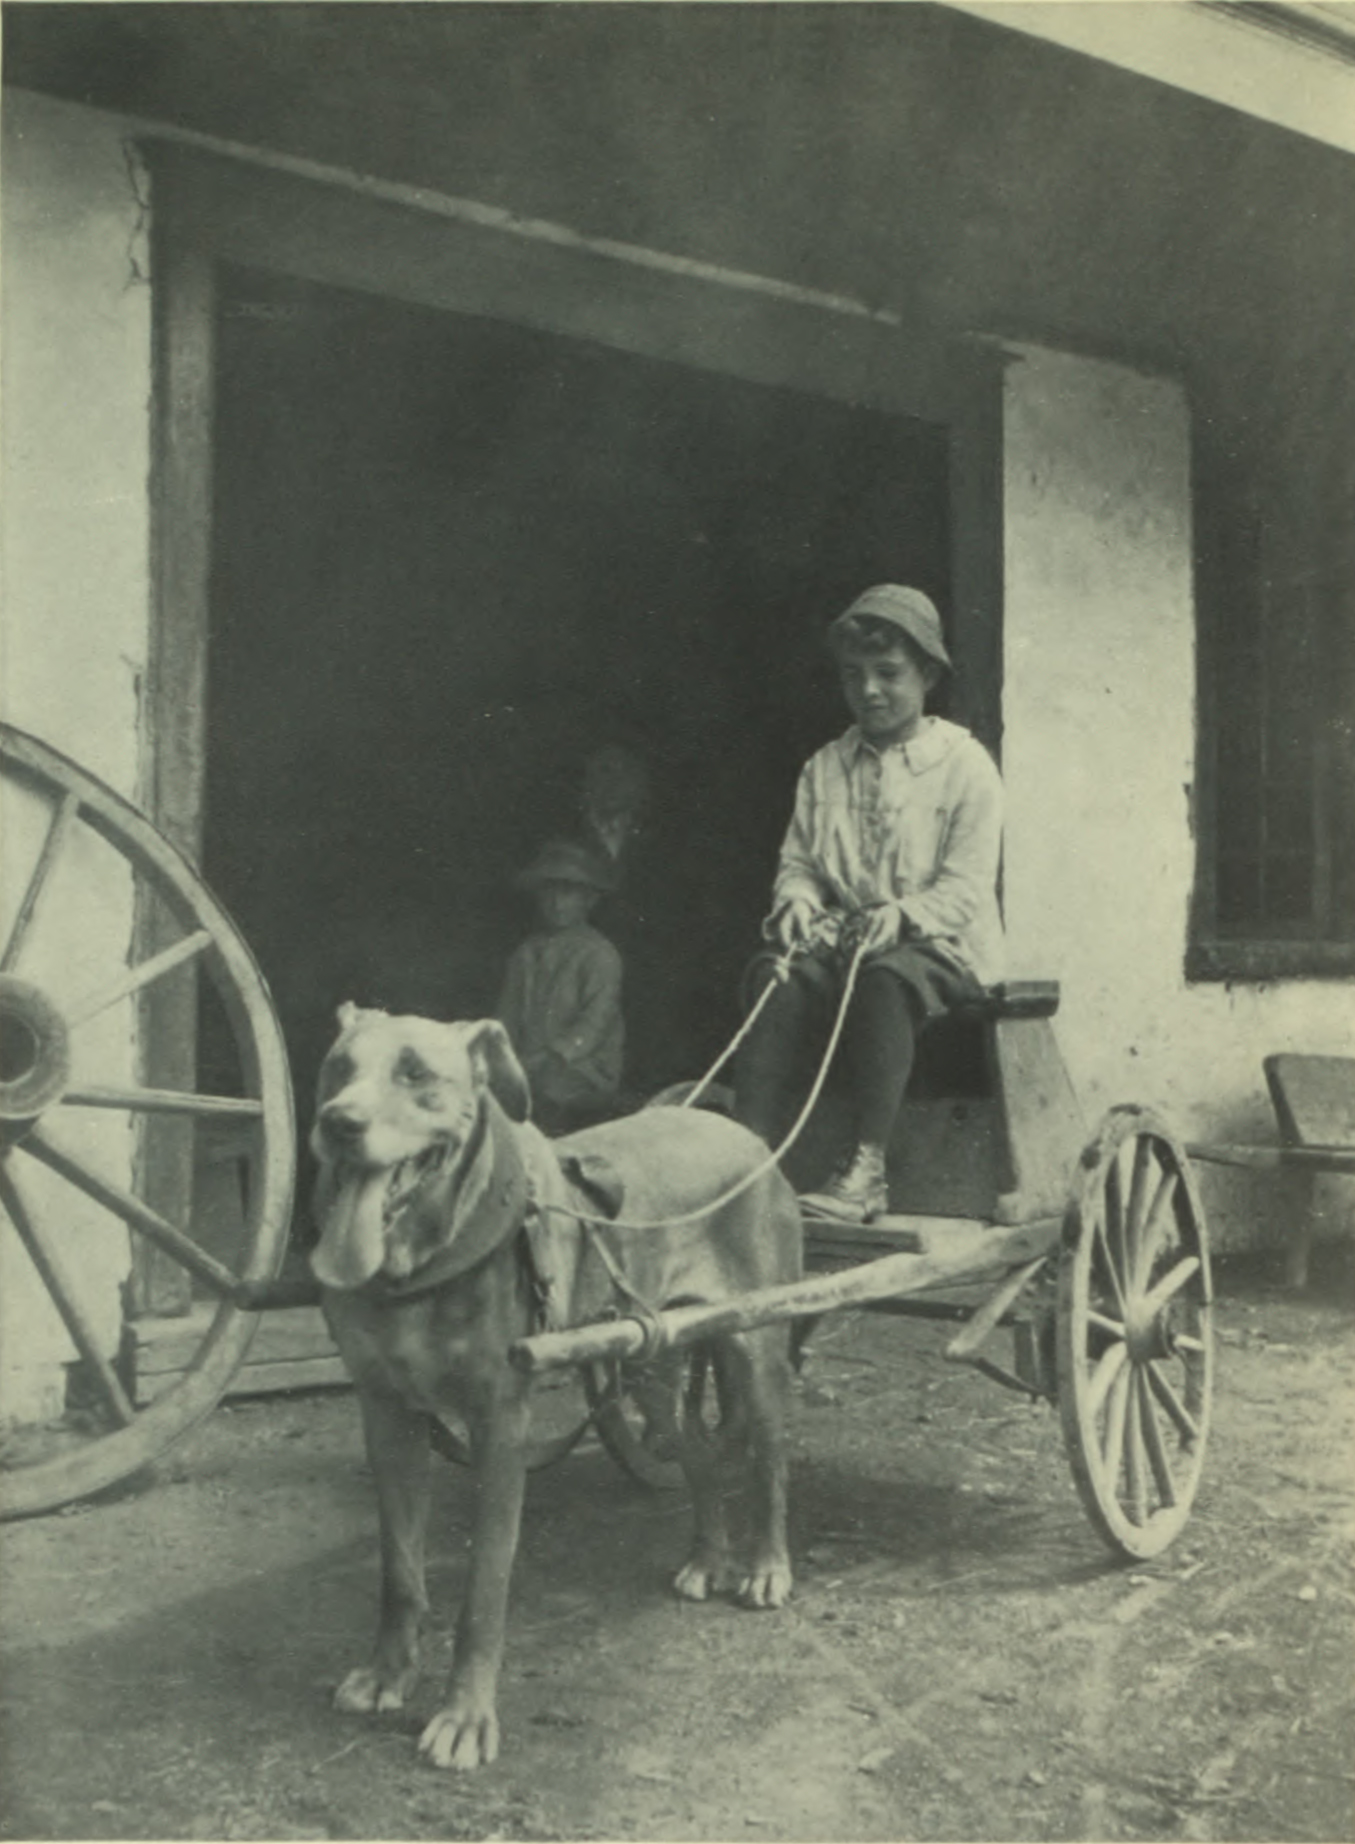 Boy in dog-driven cart, reigns in his hands.